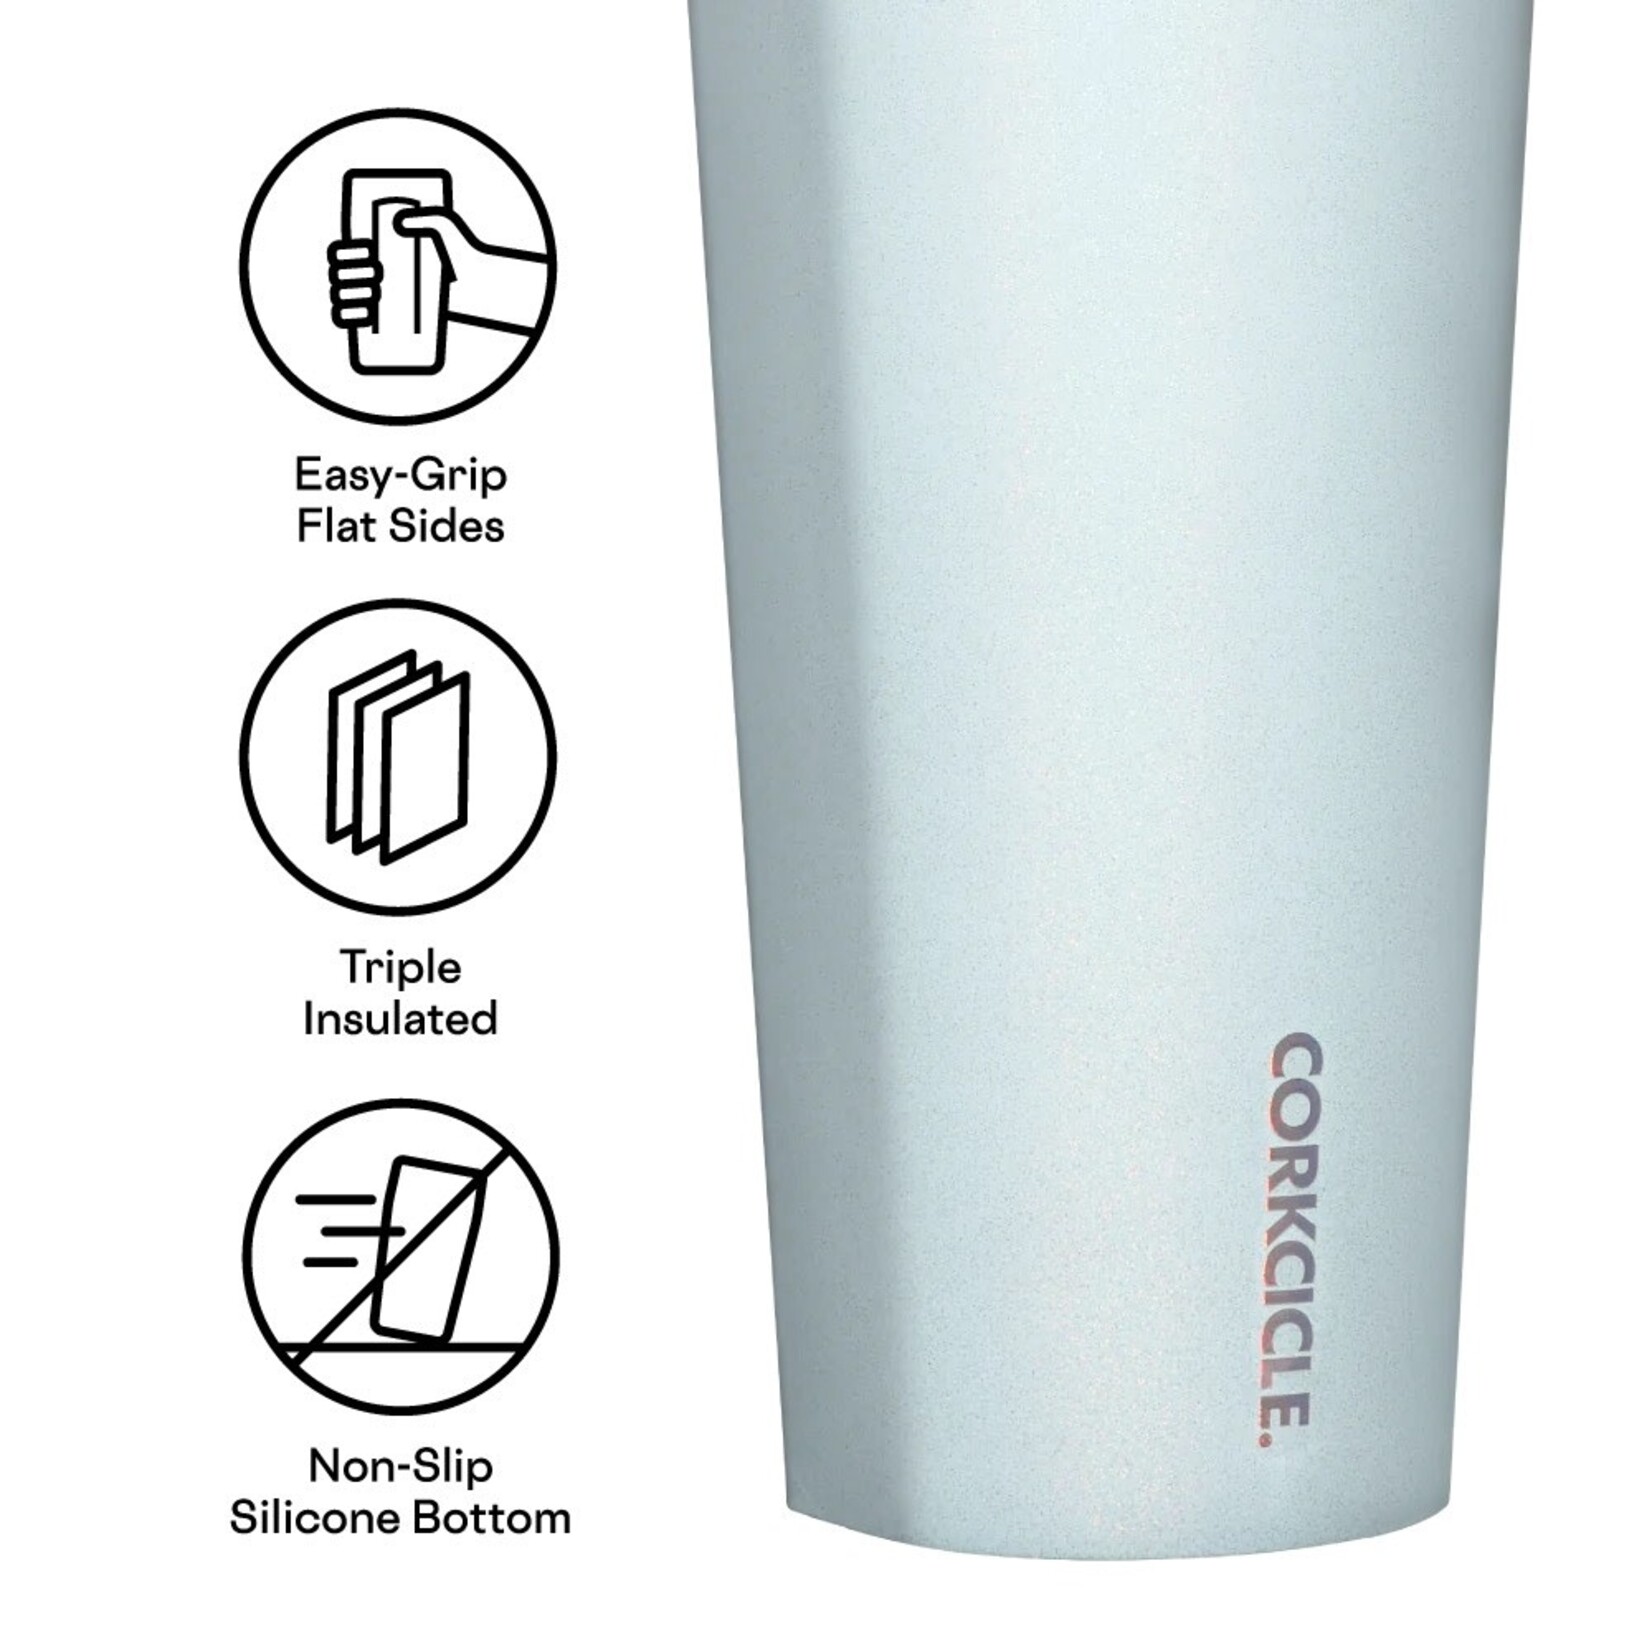 CORKCICLE CORKCICLE Cold Cup XL Ice Queen 30oz